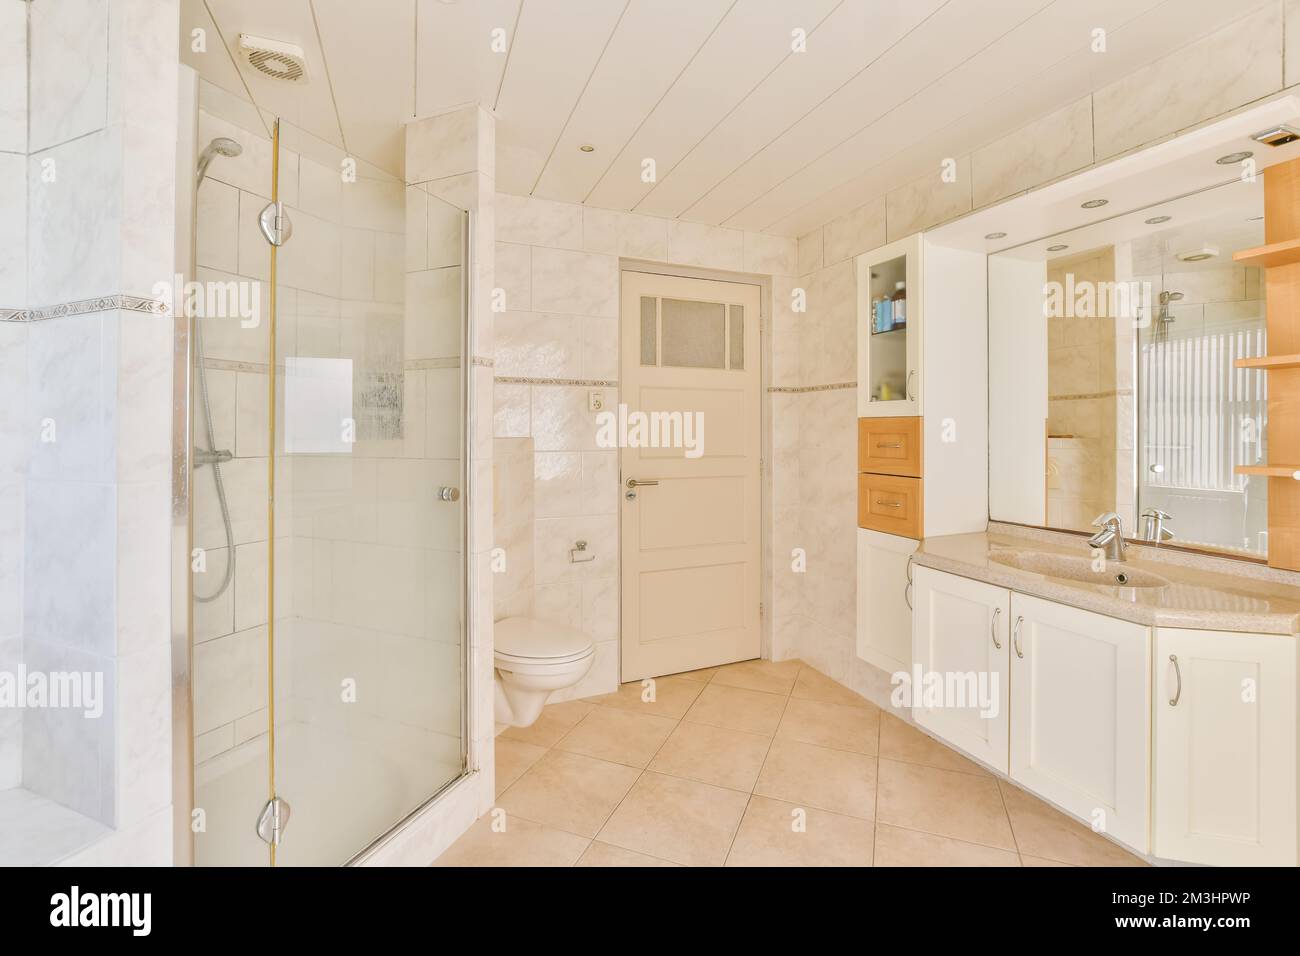 a bathroom that is very clean and ready for us to use as a shower stall or room in the house Stock Photo